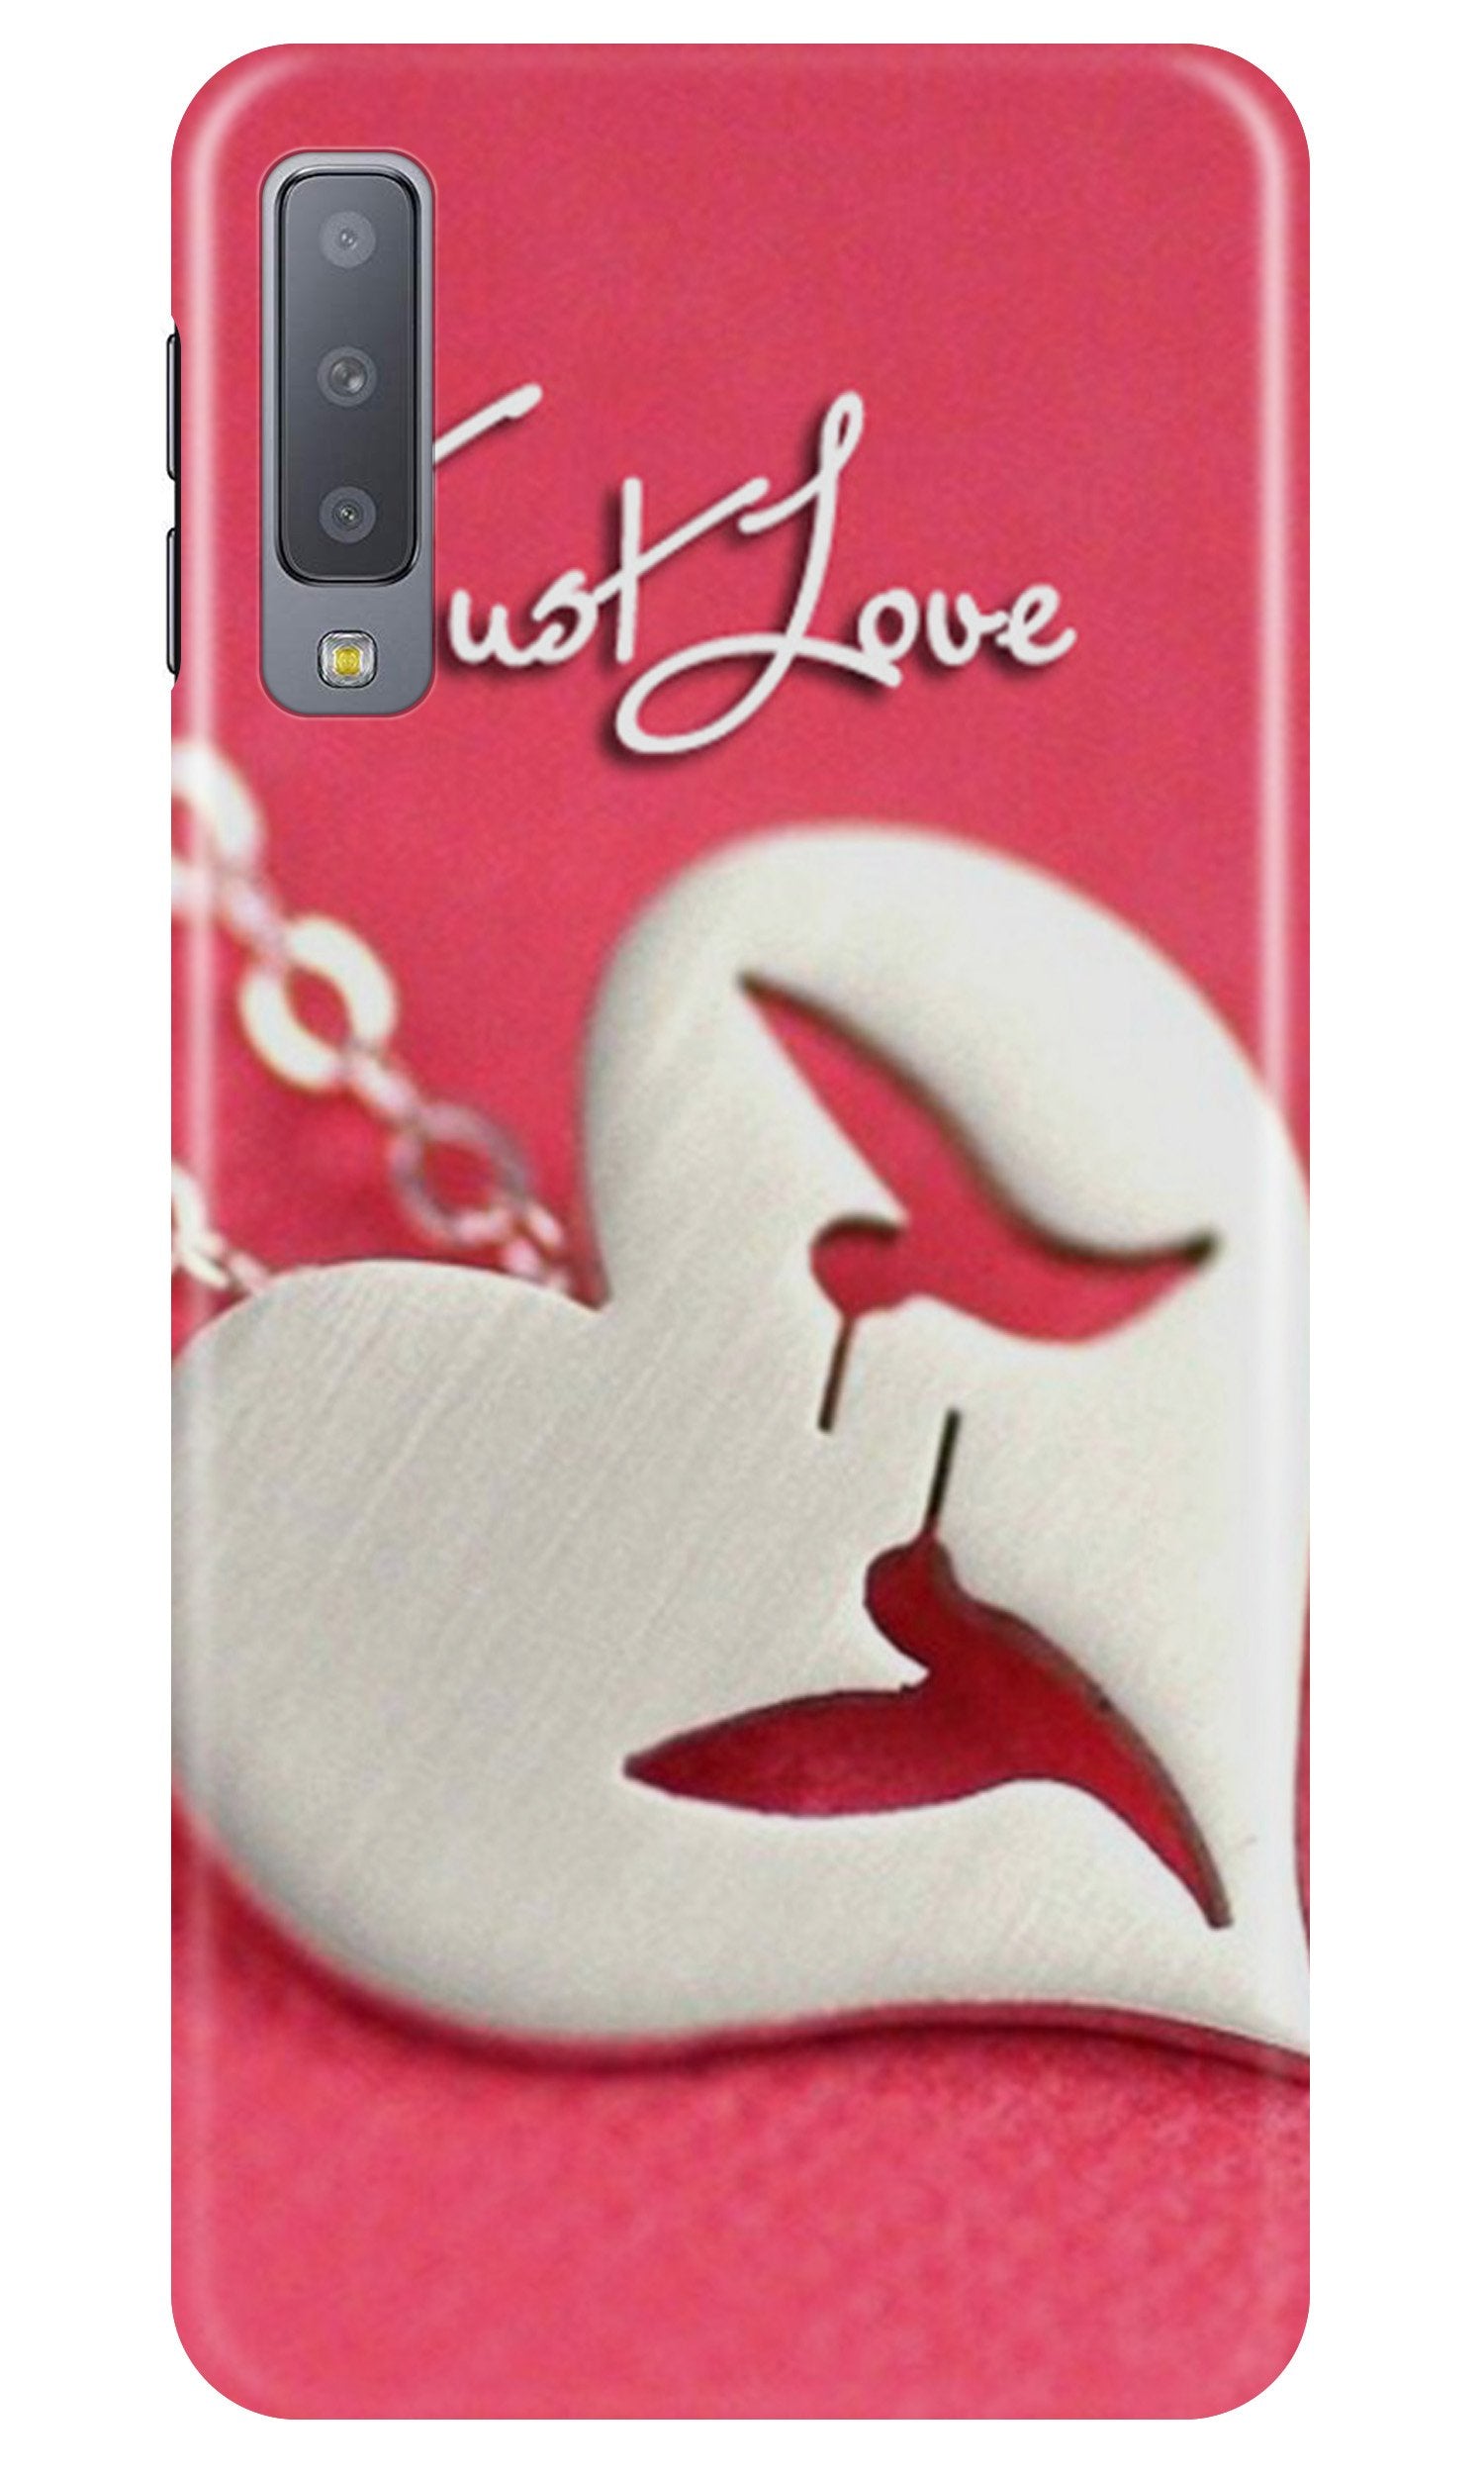 Just love Case for Samsung Galaxy A30s